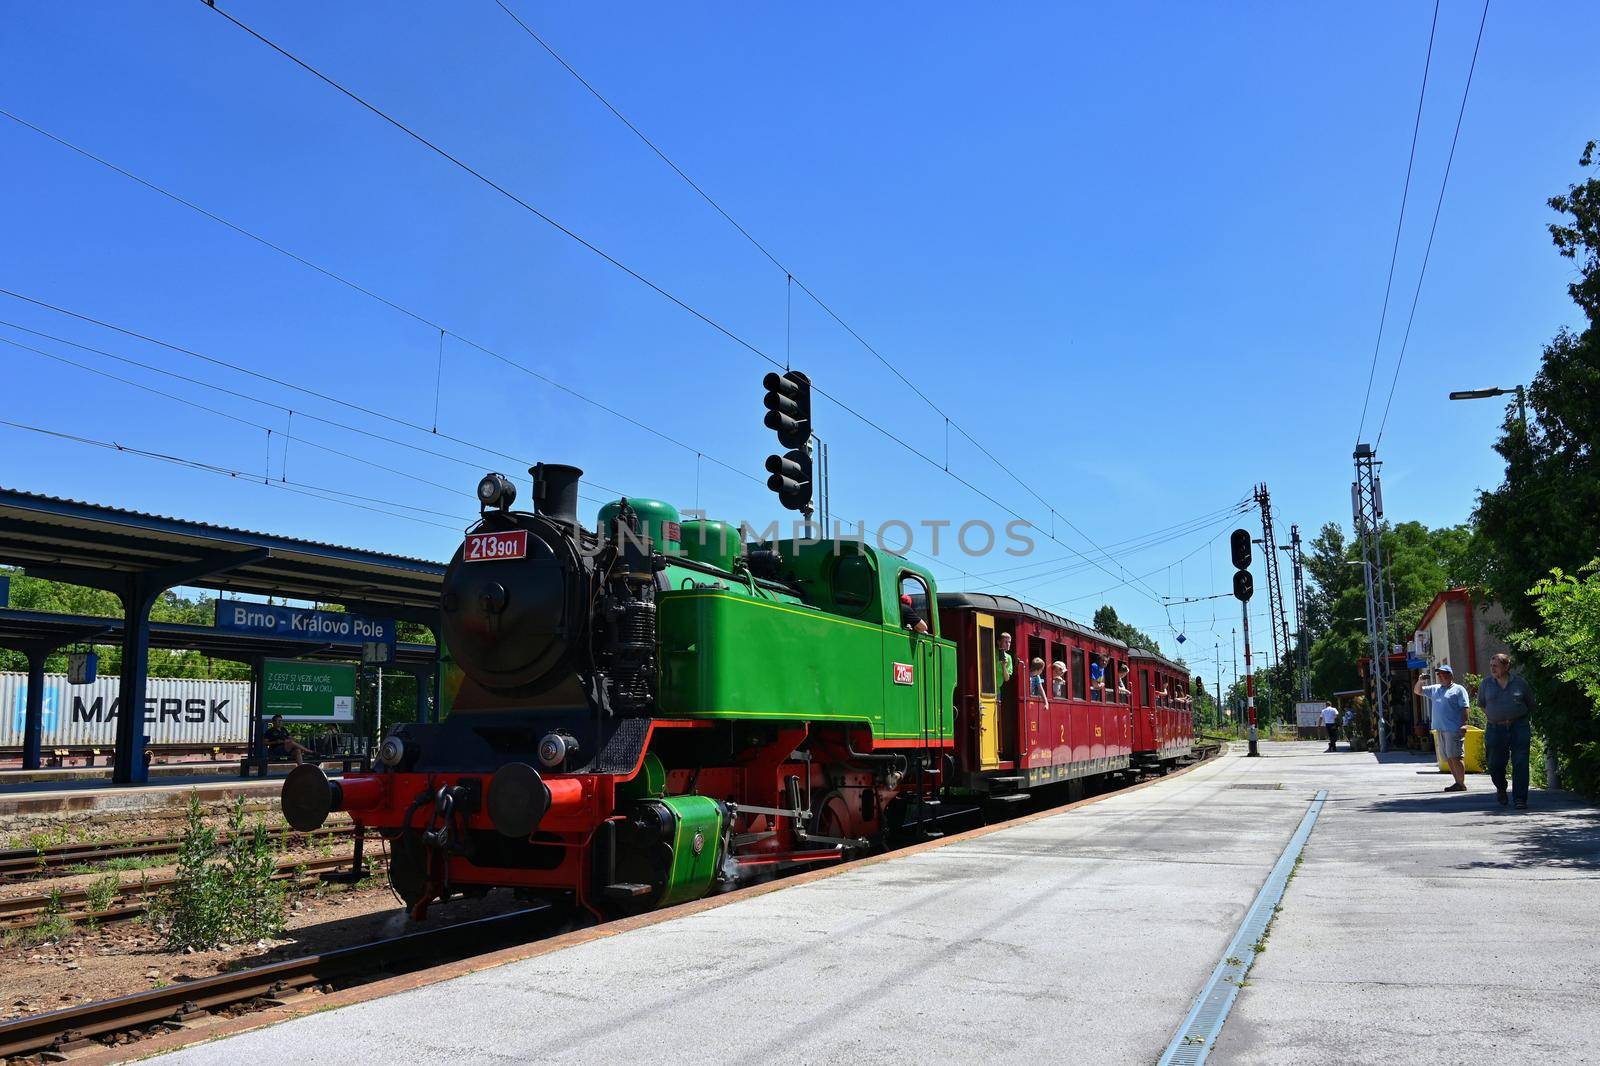 Brno - Czech Republic. June 18, 2022. Beautiful old Czech train with steam locomotive. Concept for retro, travel and train travel. Train tracks and a cruise train in the countryside.